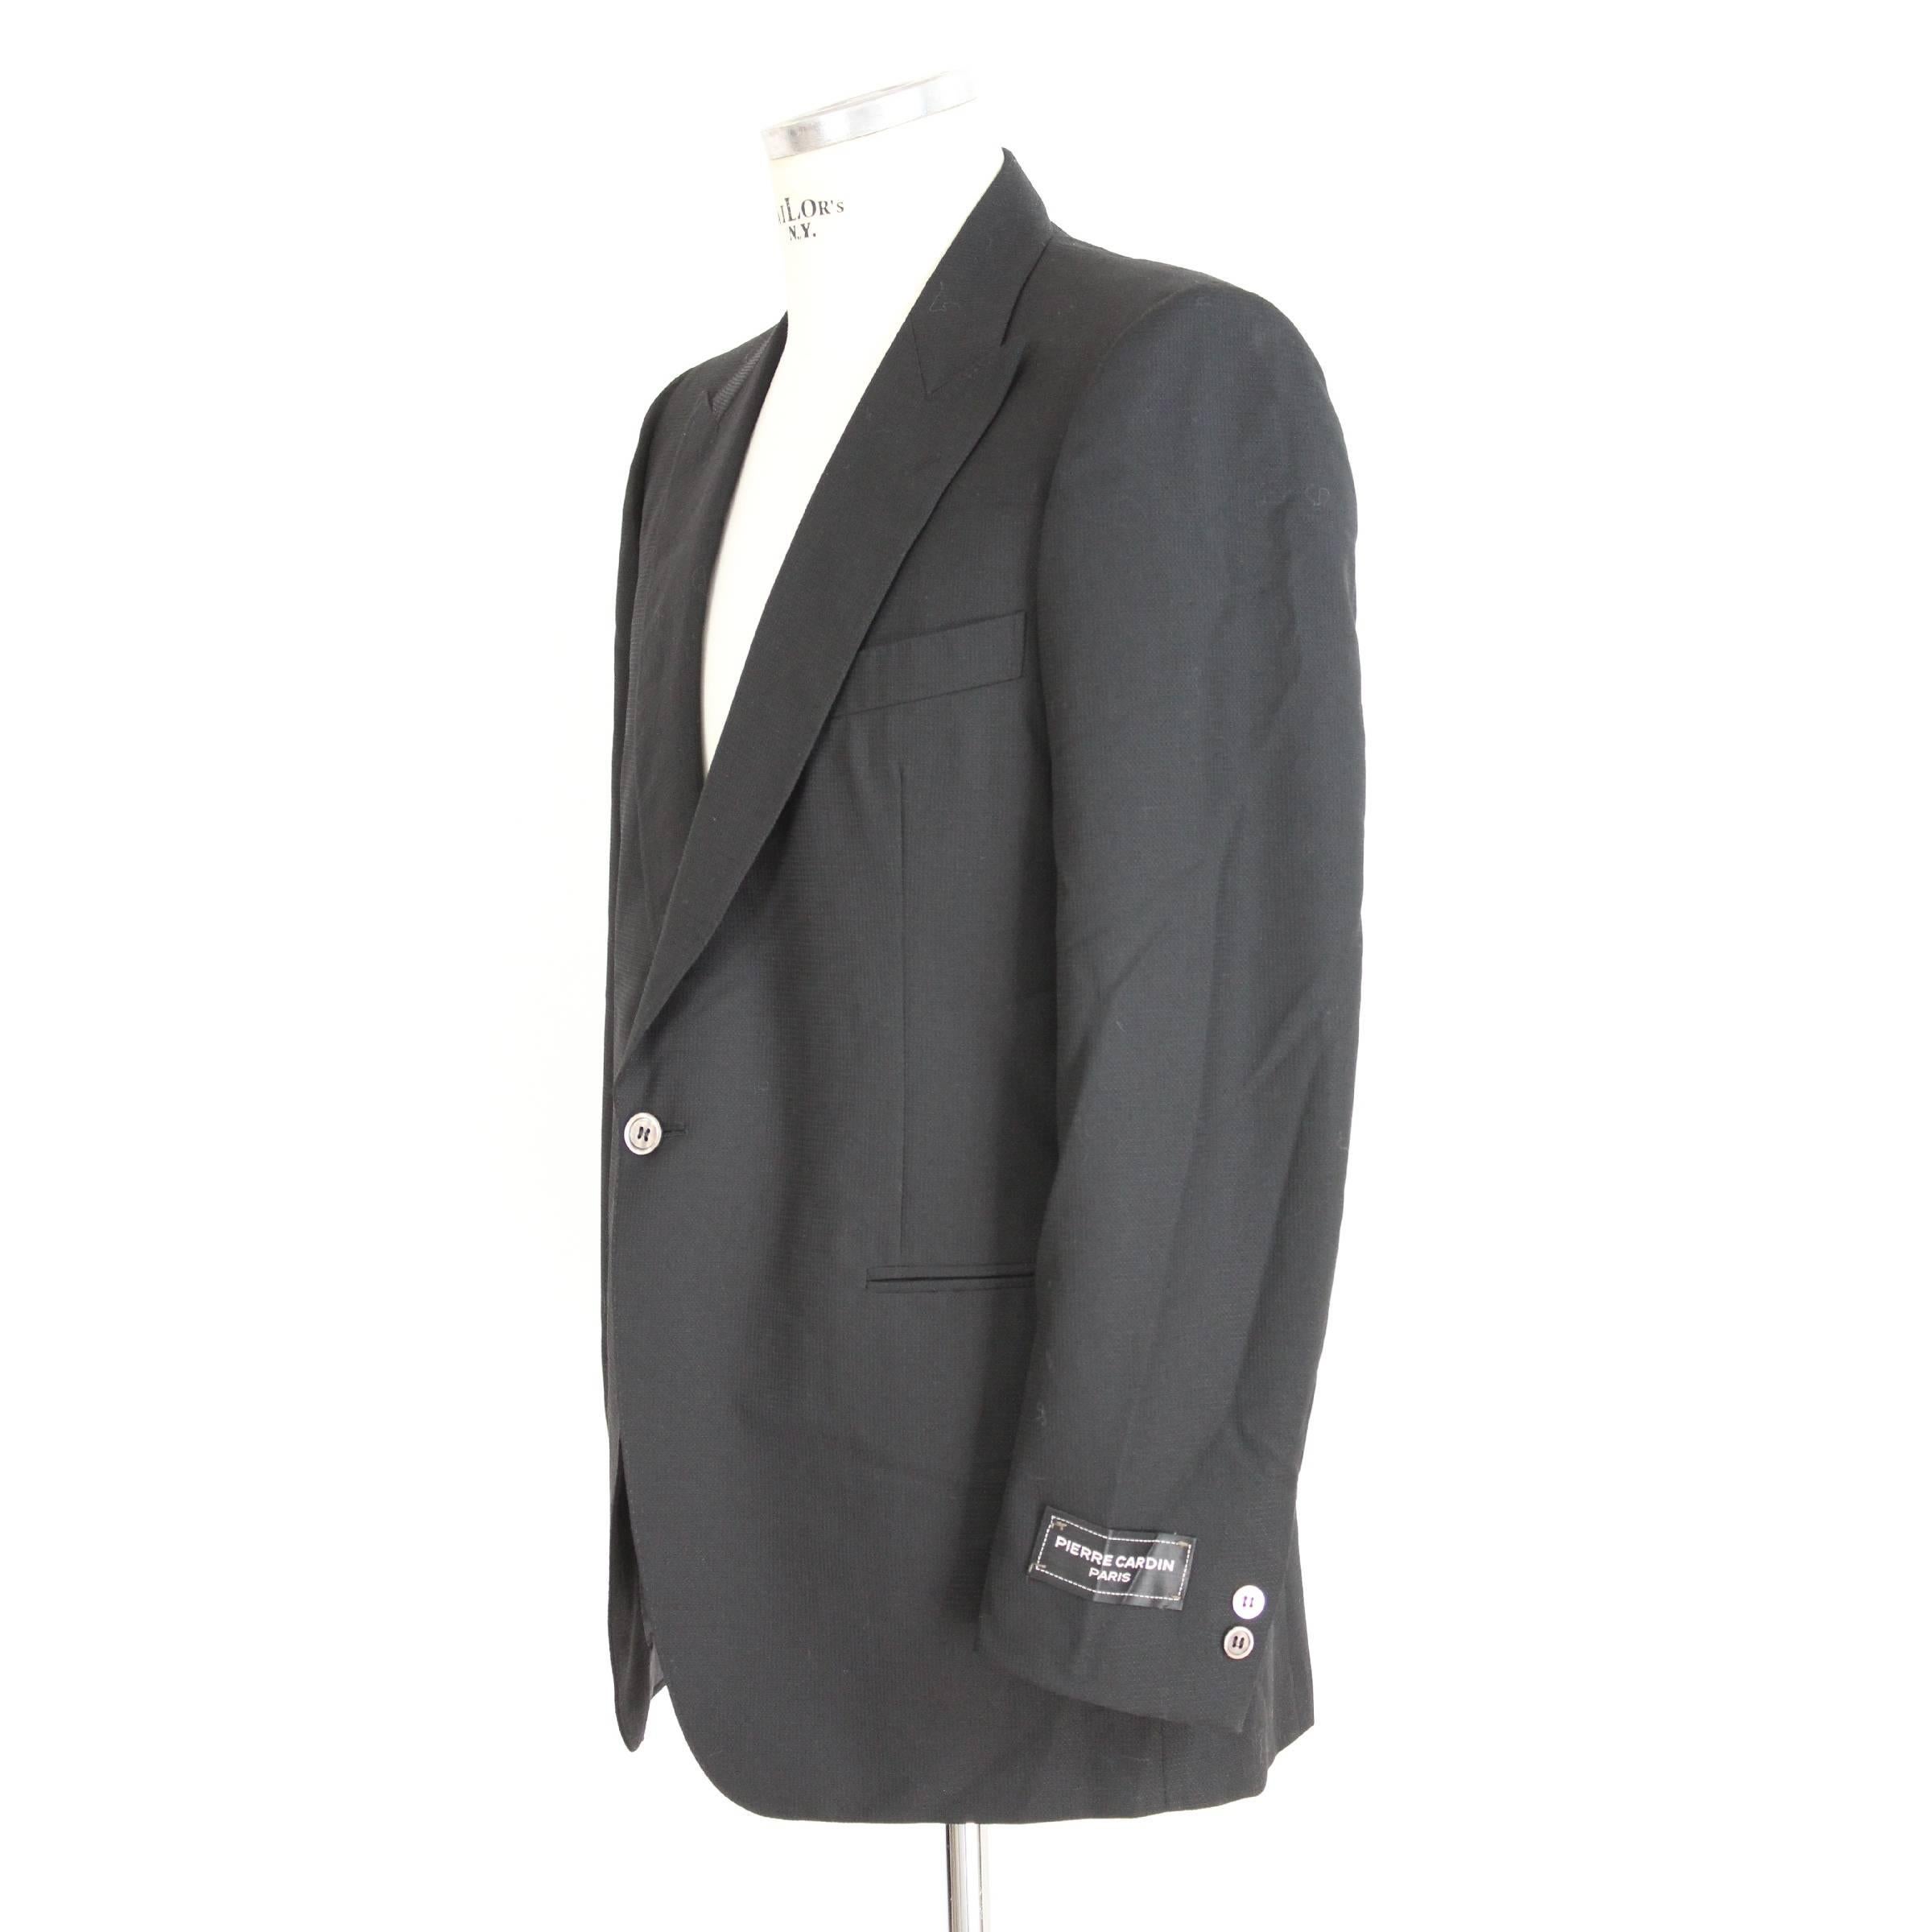 Pierre Cardin men's tuxedo jacket. One button closure with two pockets on the sides and a chest pocket, pique fabric. New without label.

Size 52 It 42 Us 42 Uk

Shoulders: 52 cm
Chest / bust: 53 cm
Sleeves: 62 cm
Length: 84 cm

Black